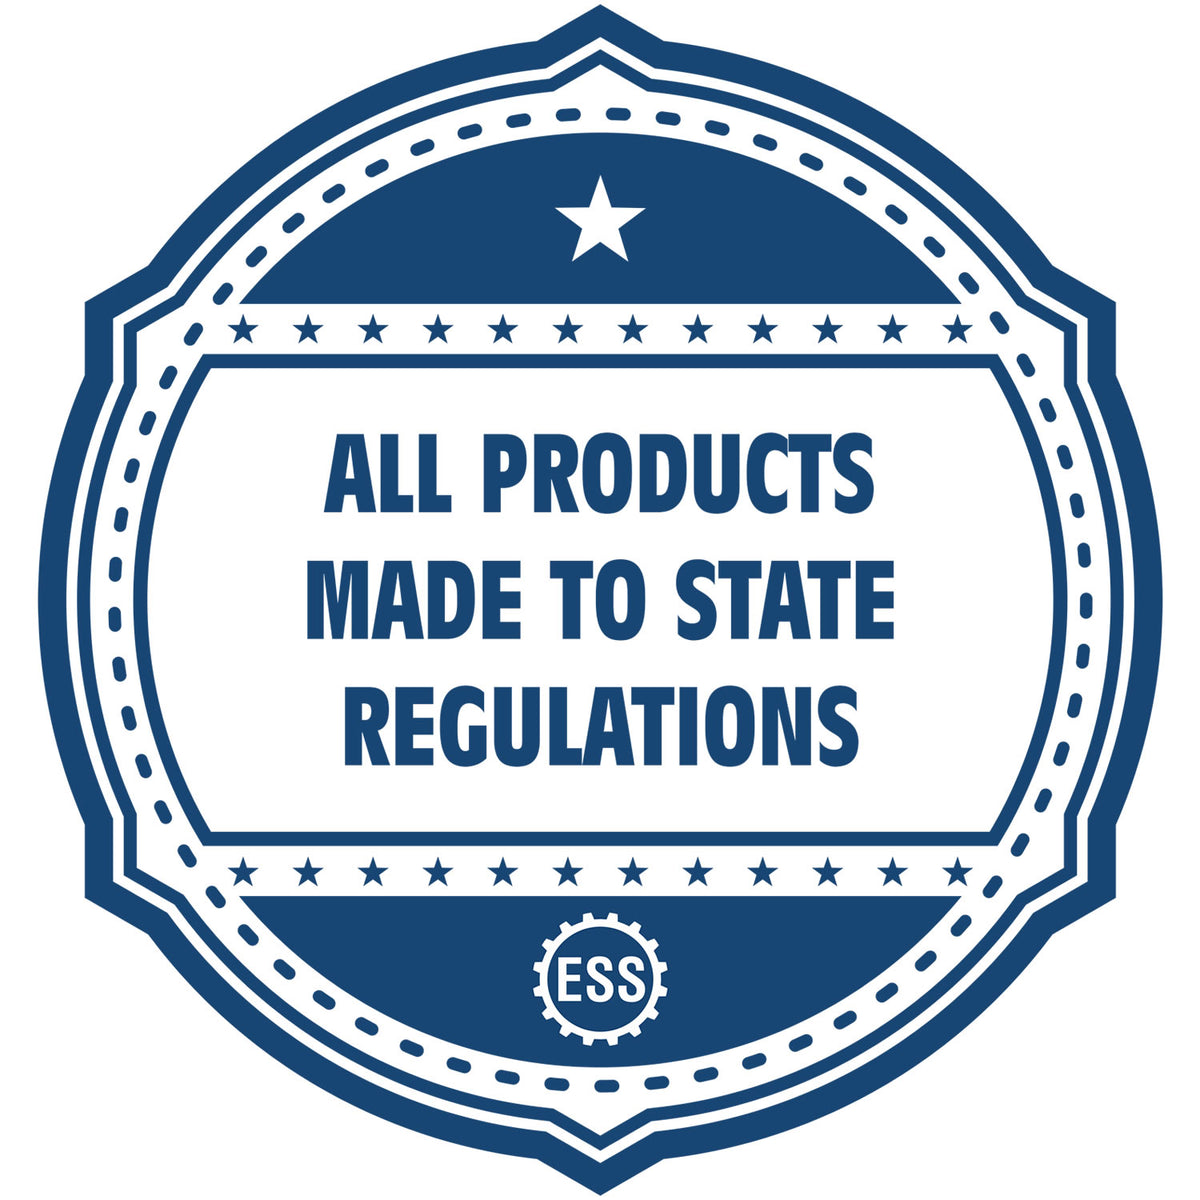 An icon or badge element for the Self-Inking Arizona PE Stamp showing that this product is made in compliance with state regulations.